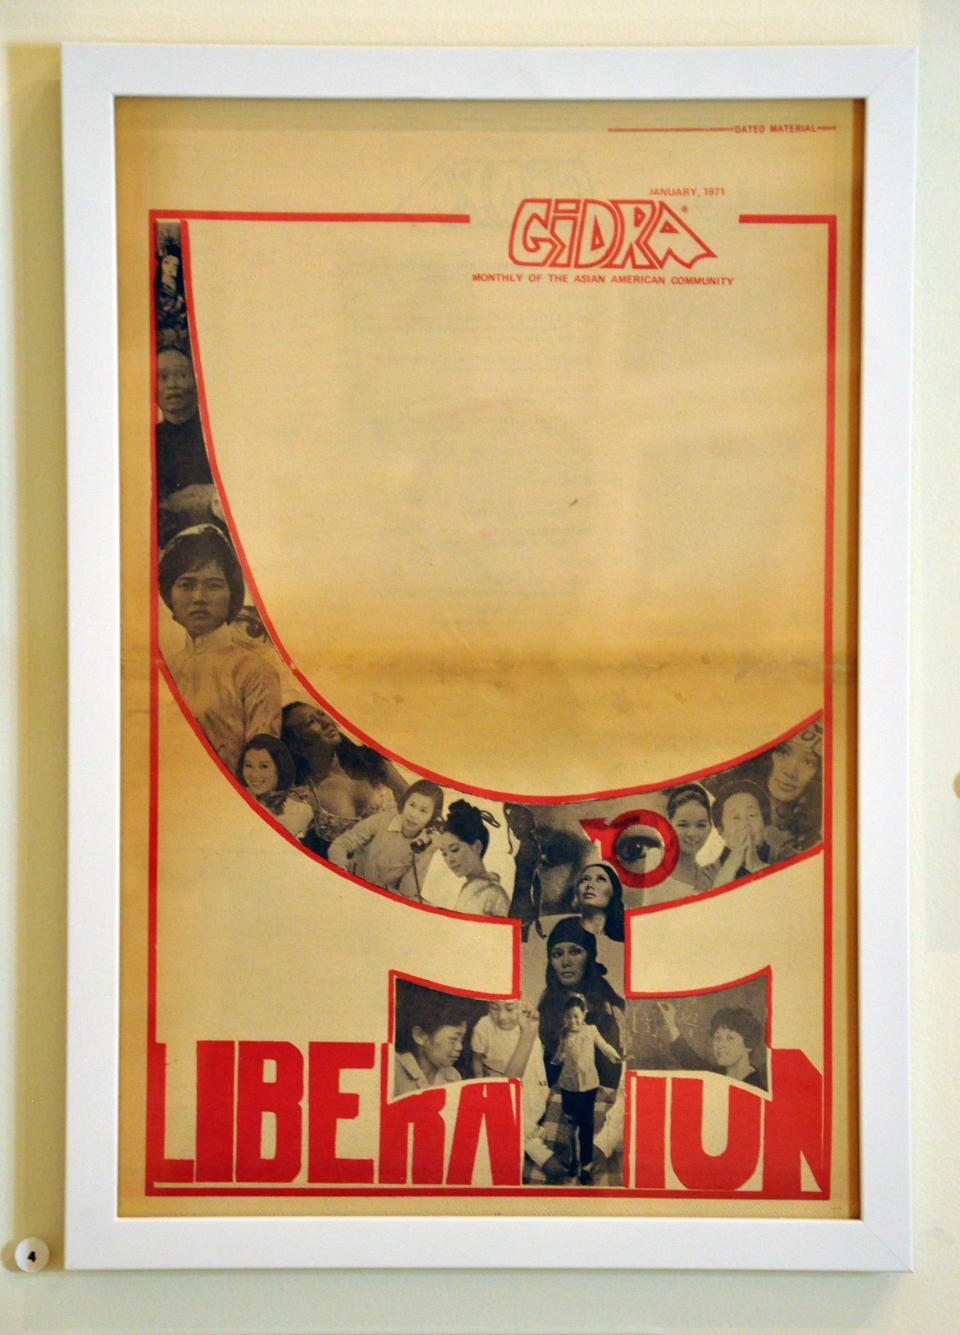 The <a href="http://www.densho.org/gidra-now-available-online/" target="_blank">newspaper Gidra </a>was one of the central communication branches of the Asian American Movement. At its peak, the paper's volunteer staff printed several thousand copies per issue. The paper covered everything from local campaigns, the legacies of internment camp and media representations of Asian Americans.